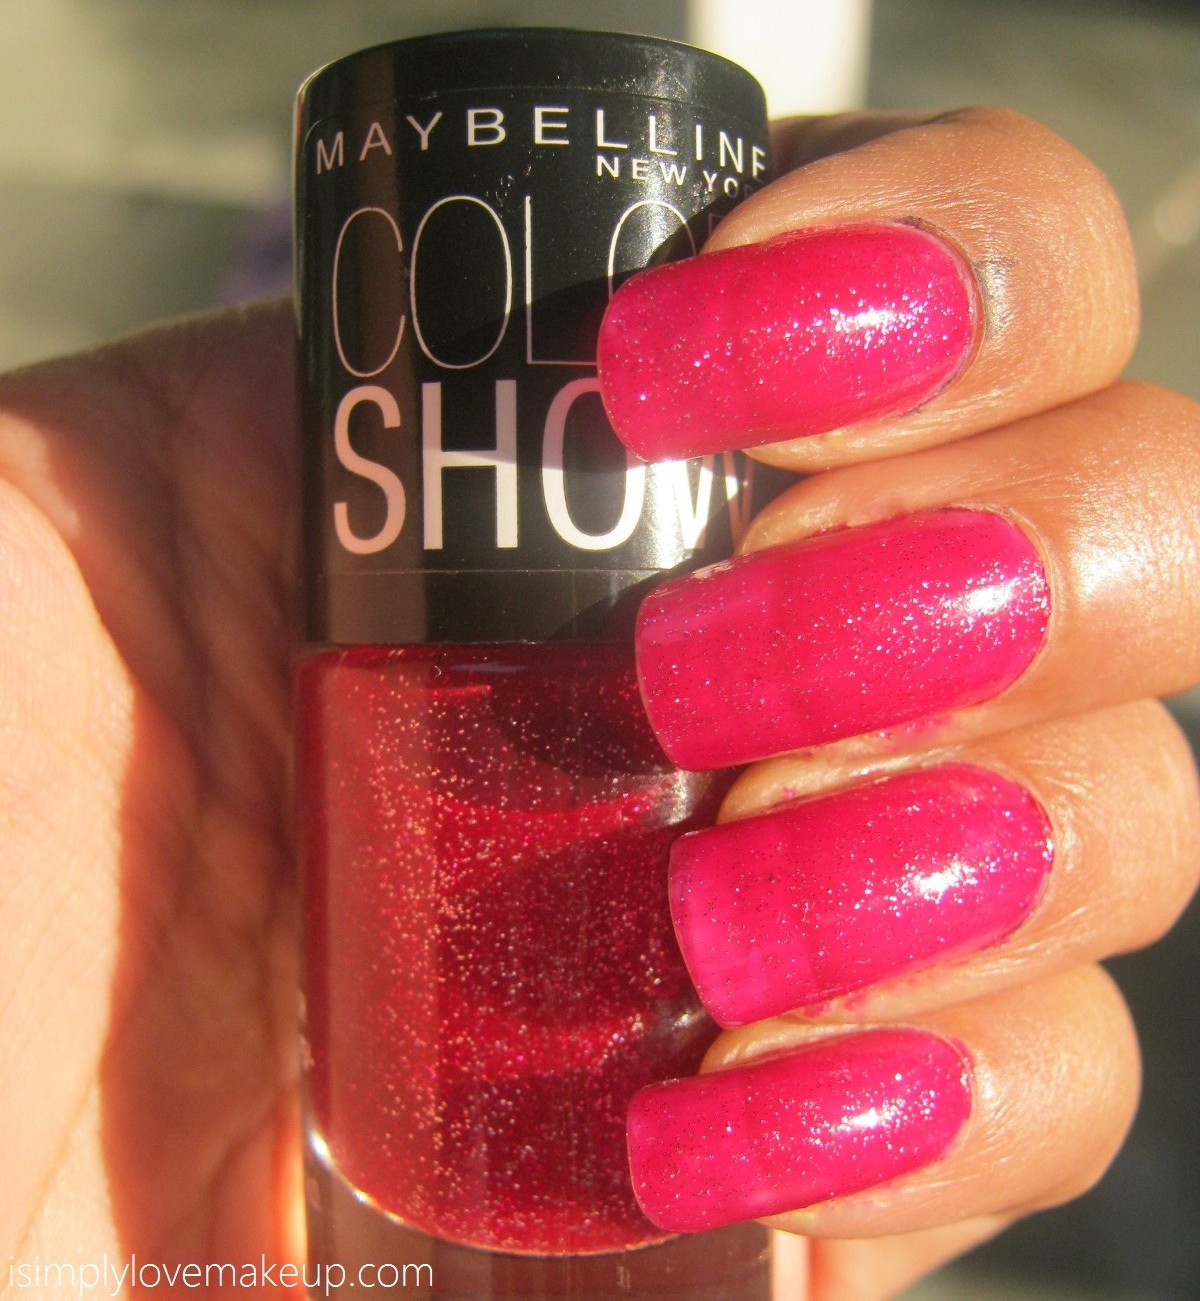 REVIEW: Maybelline Color Show Nail Paint in Velvet Wine